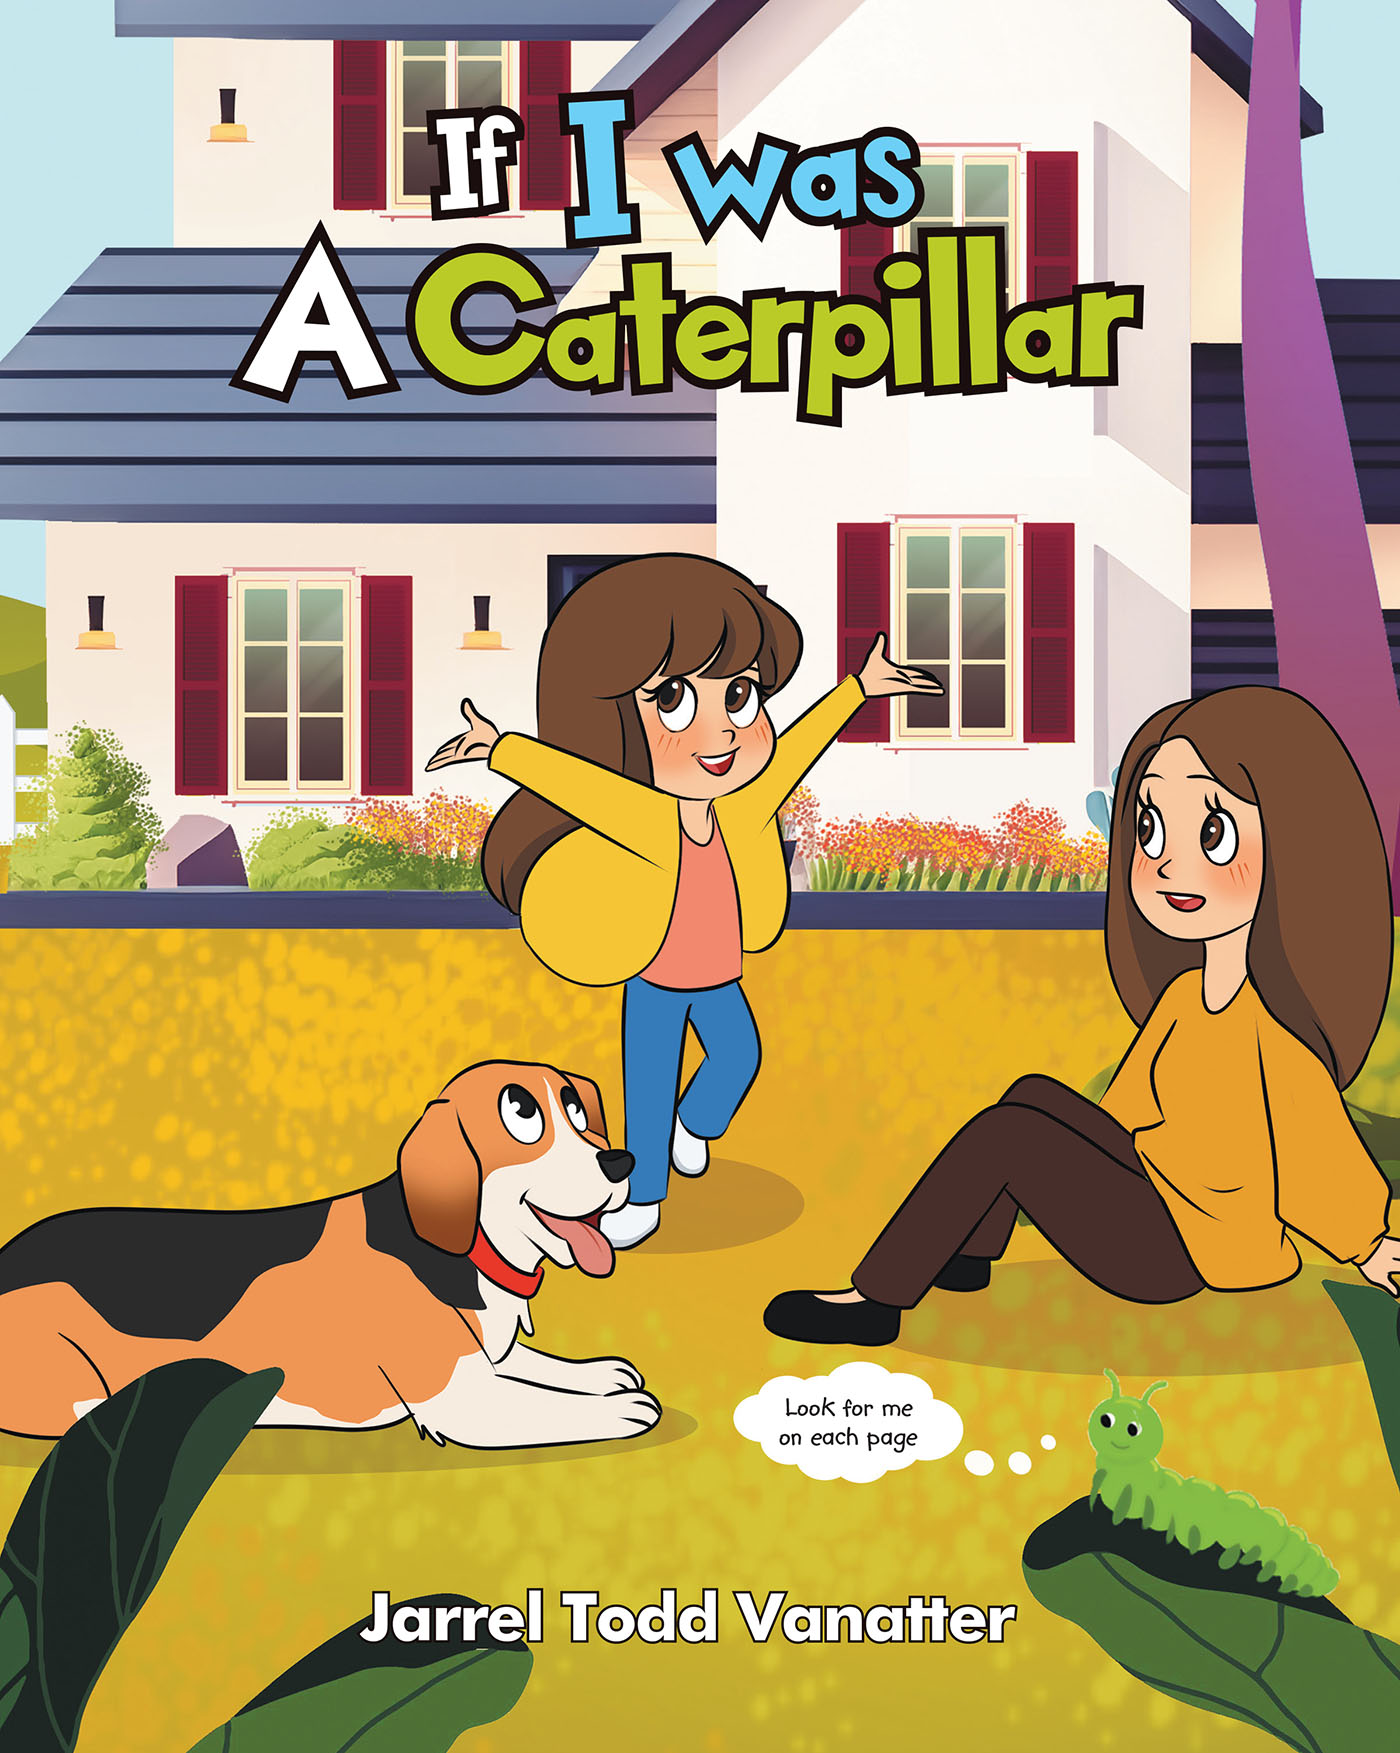 Author Jarrel Todd Vanatter’s New Book, "If I Was a Caterpillar," Explores the Wild and Creative Questions Children Often Think Up and Ask the Adults in Their Lives